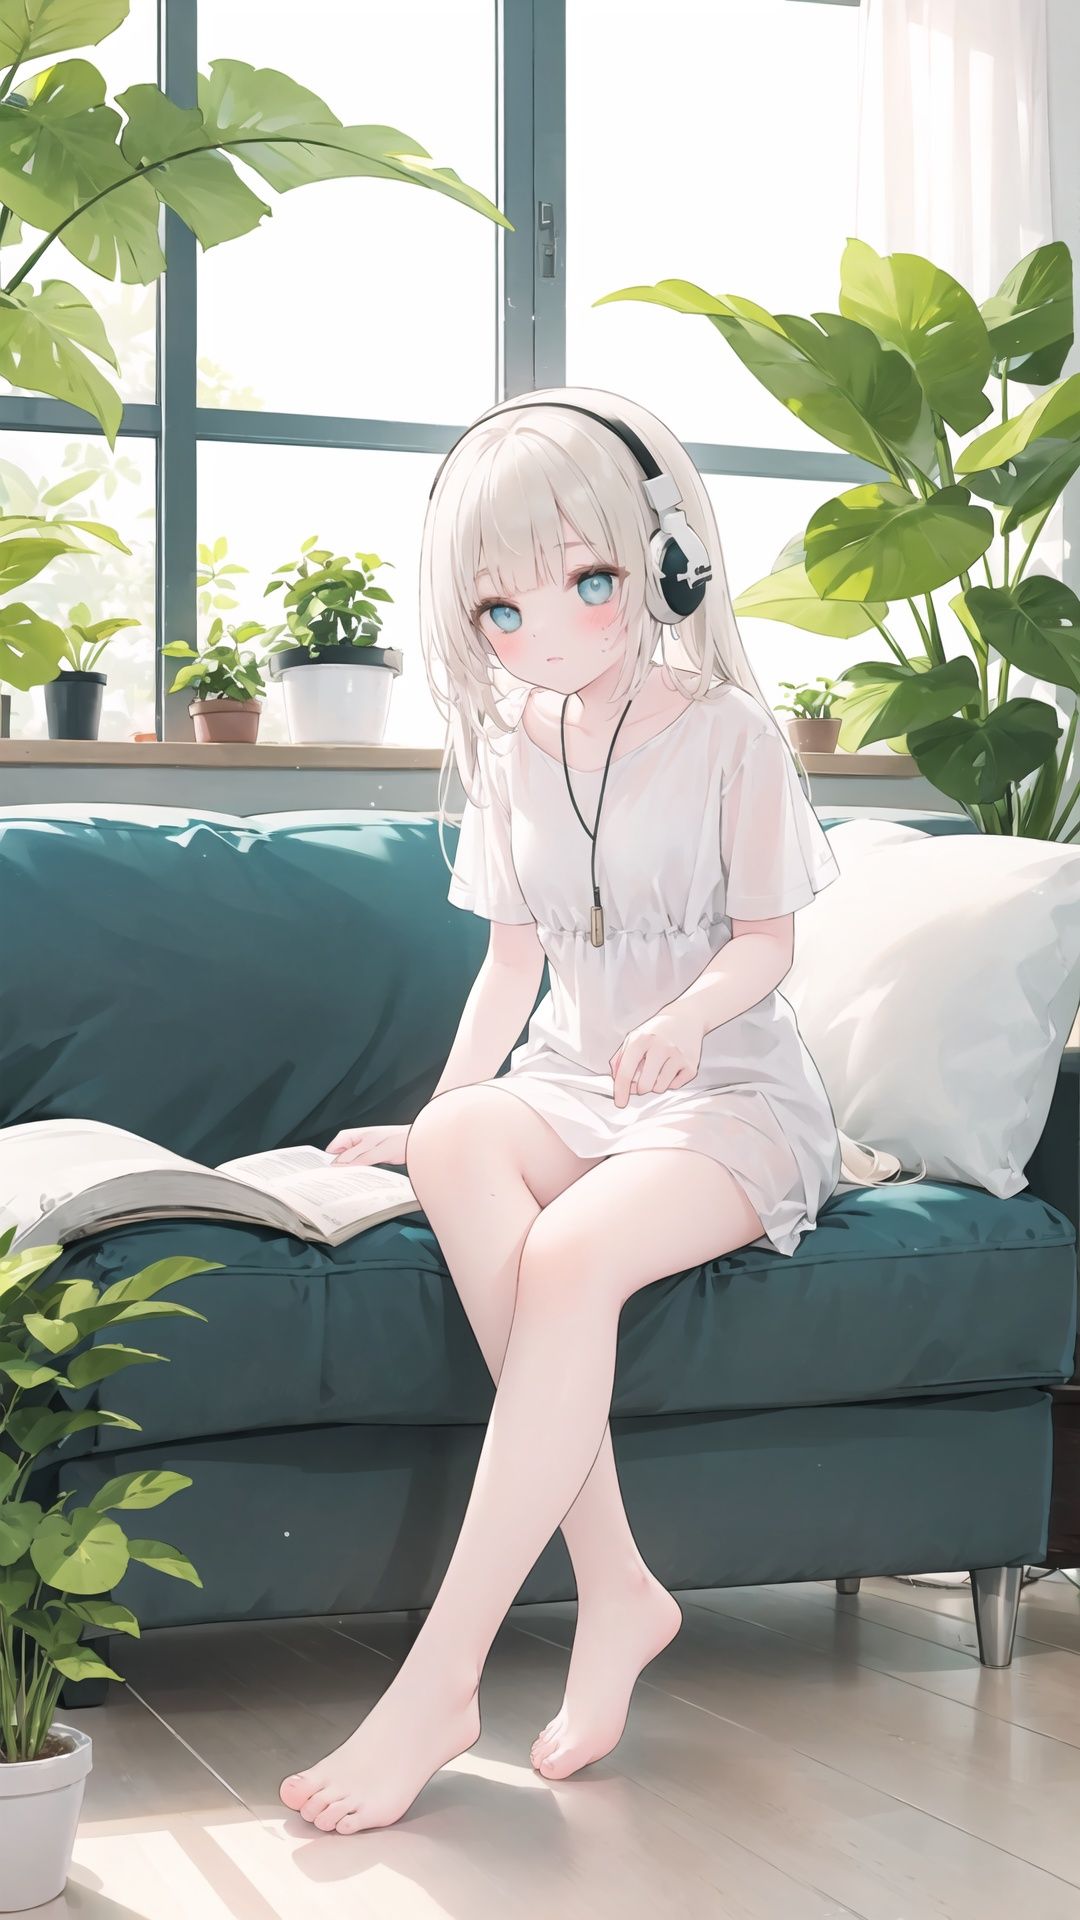 extremely delicate and beautiful, depth of field, amazing, masterpiece, growth, visual impact, ultra-detailed, 1girl, long_hair,Modernist style architecture, window, book, pillow, barefoot, solo, plant, very_long_hair, indoors, potted_plant, headphones, cup, gorgeous, fantasism, nature, refined rendering, original, contour deepening, high-key and low-variance brightness scale, soft light, light and dark interlaced